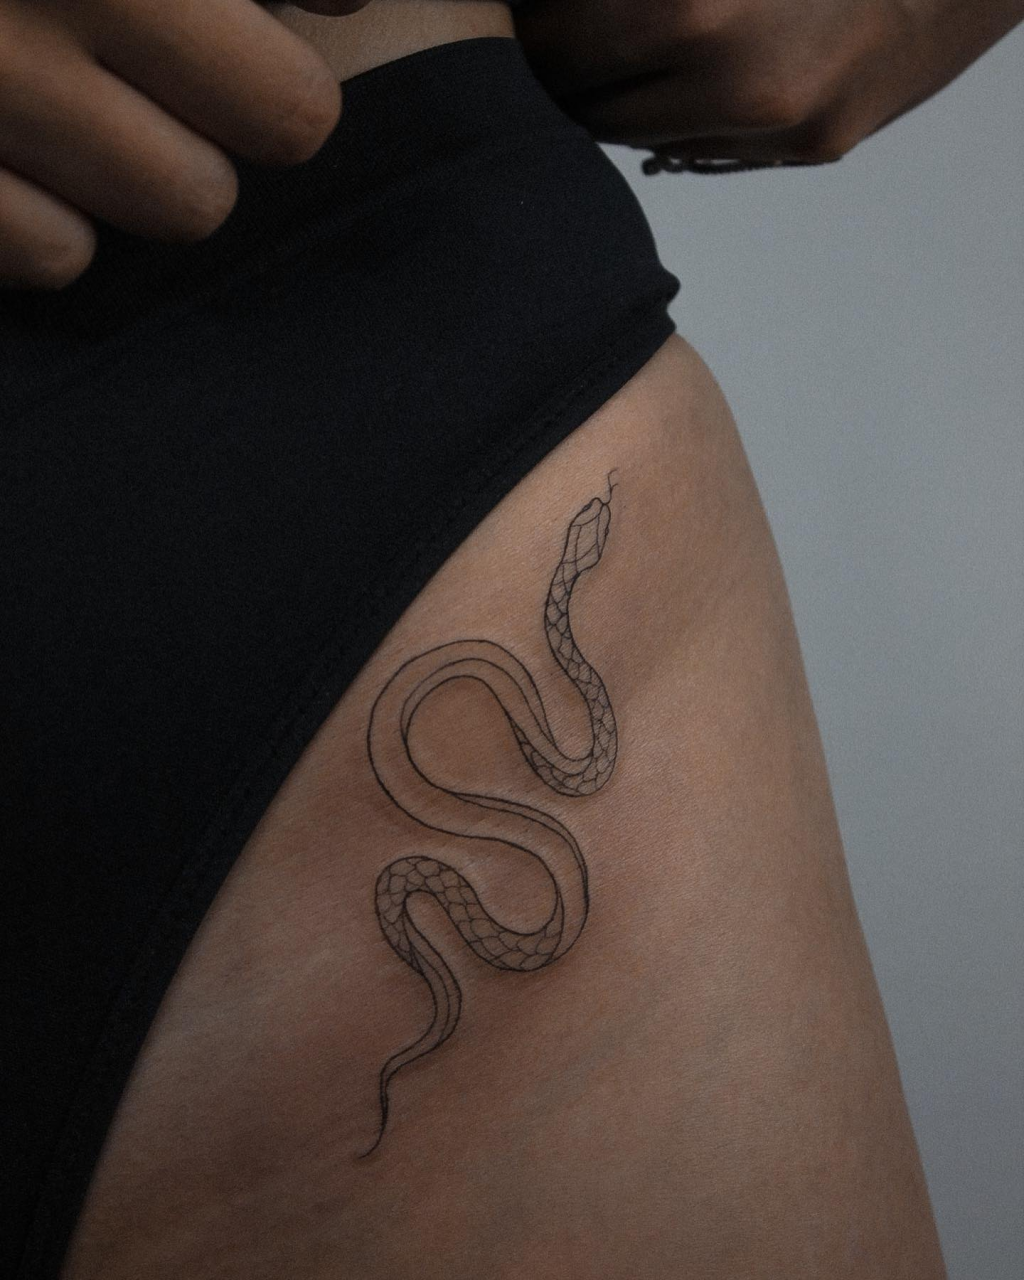 Snake tattoo on the hip by Mayo  Bali Indonesia  rtinytattoos